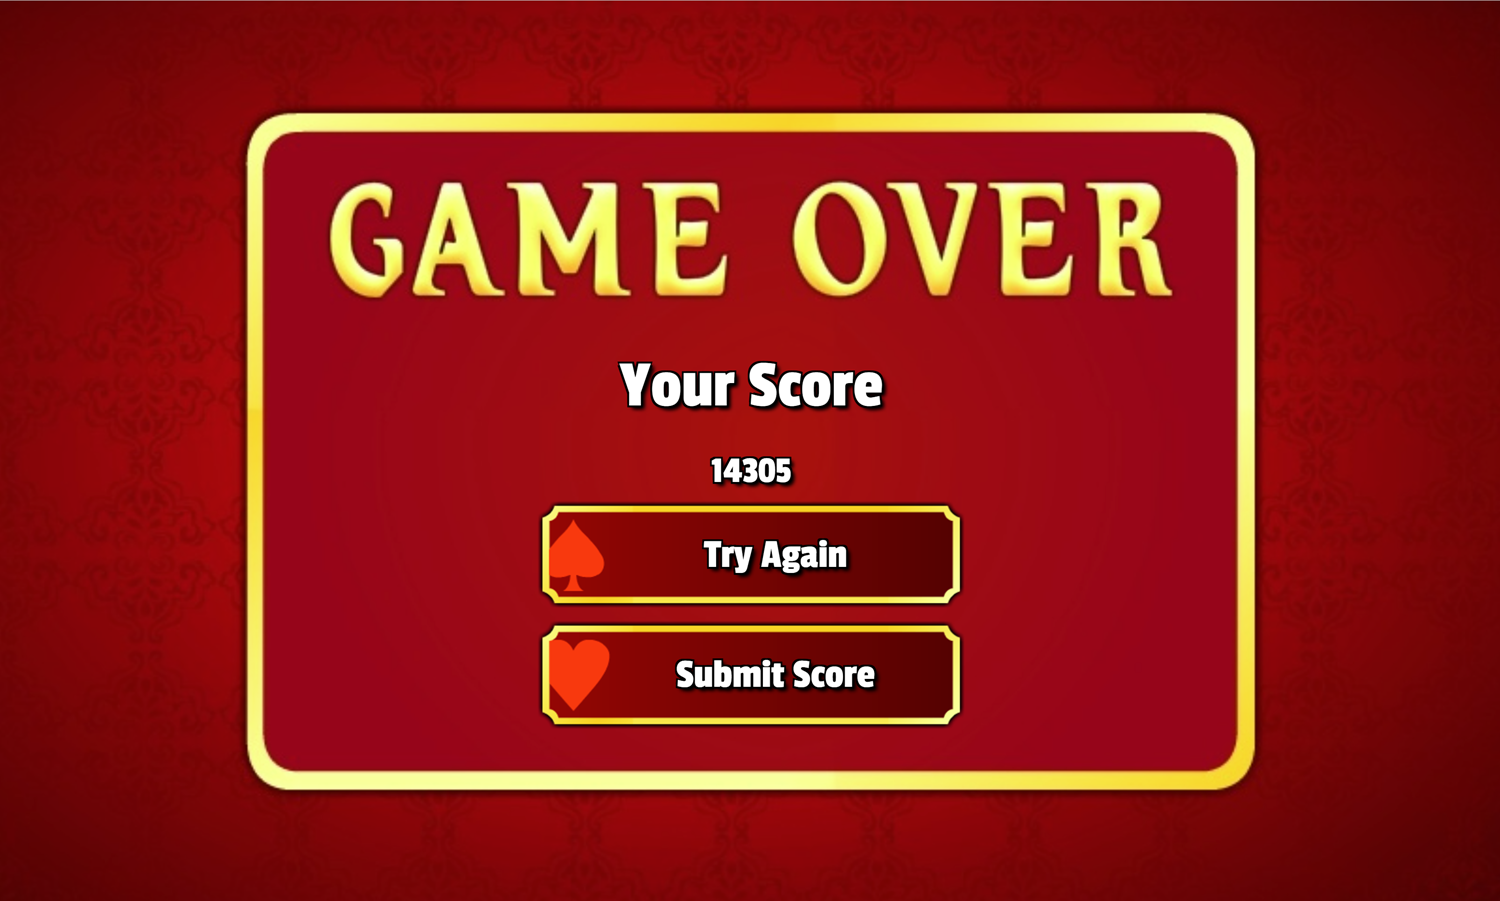 Double Freecell Game Over Screen Screenshot.